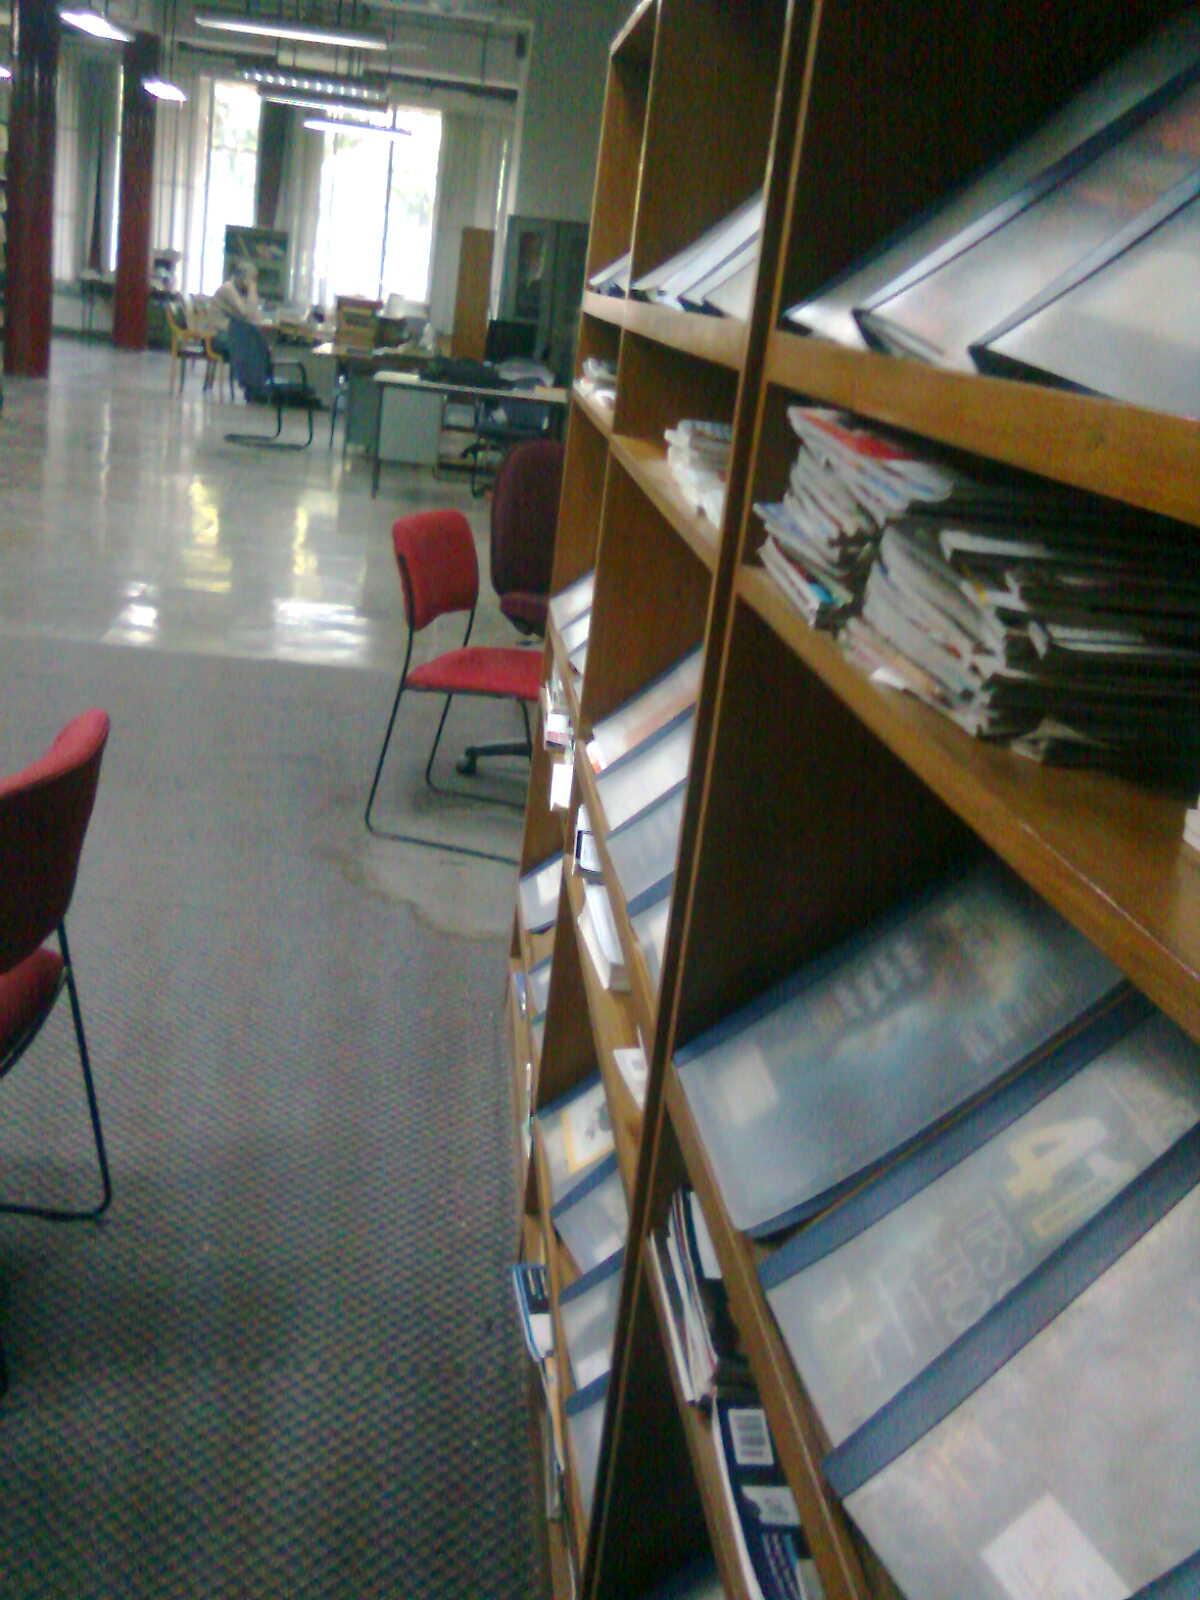 Reference Journals, Central State Library, Chandigarh